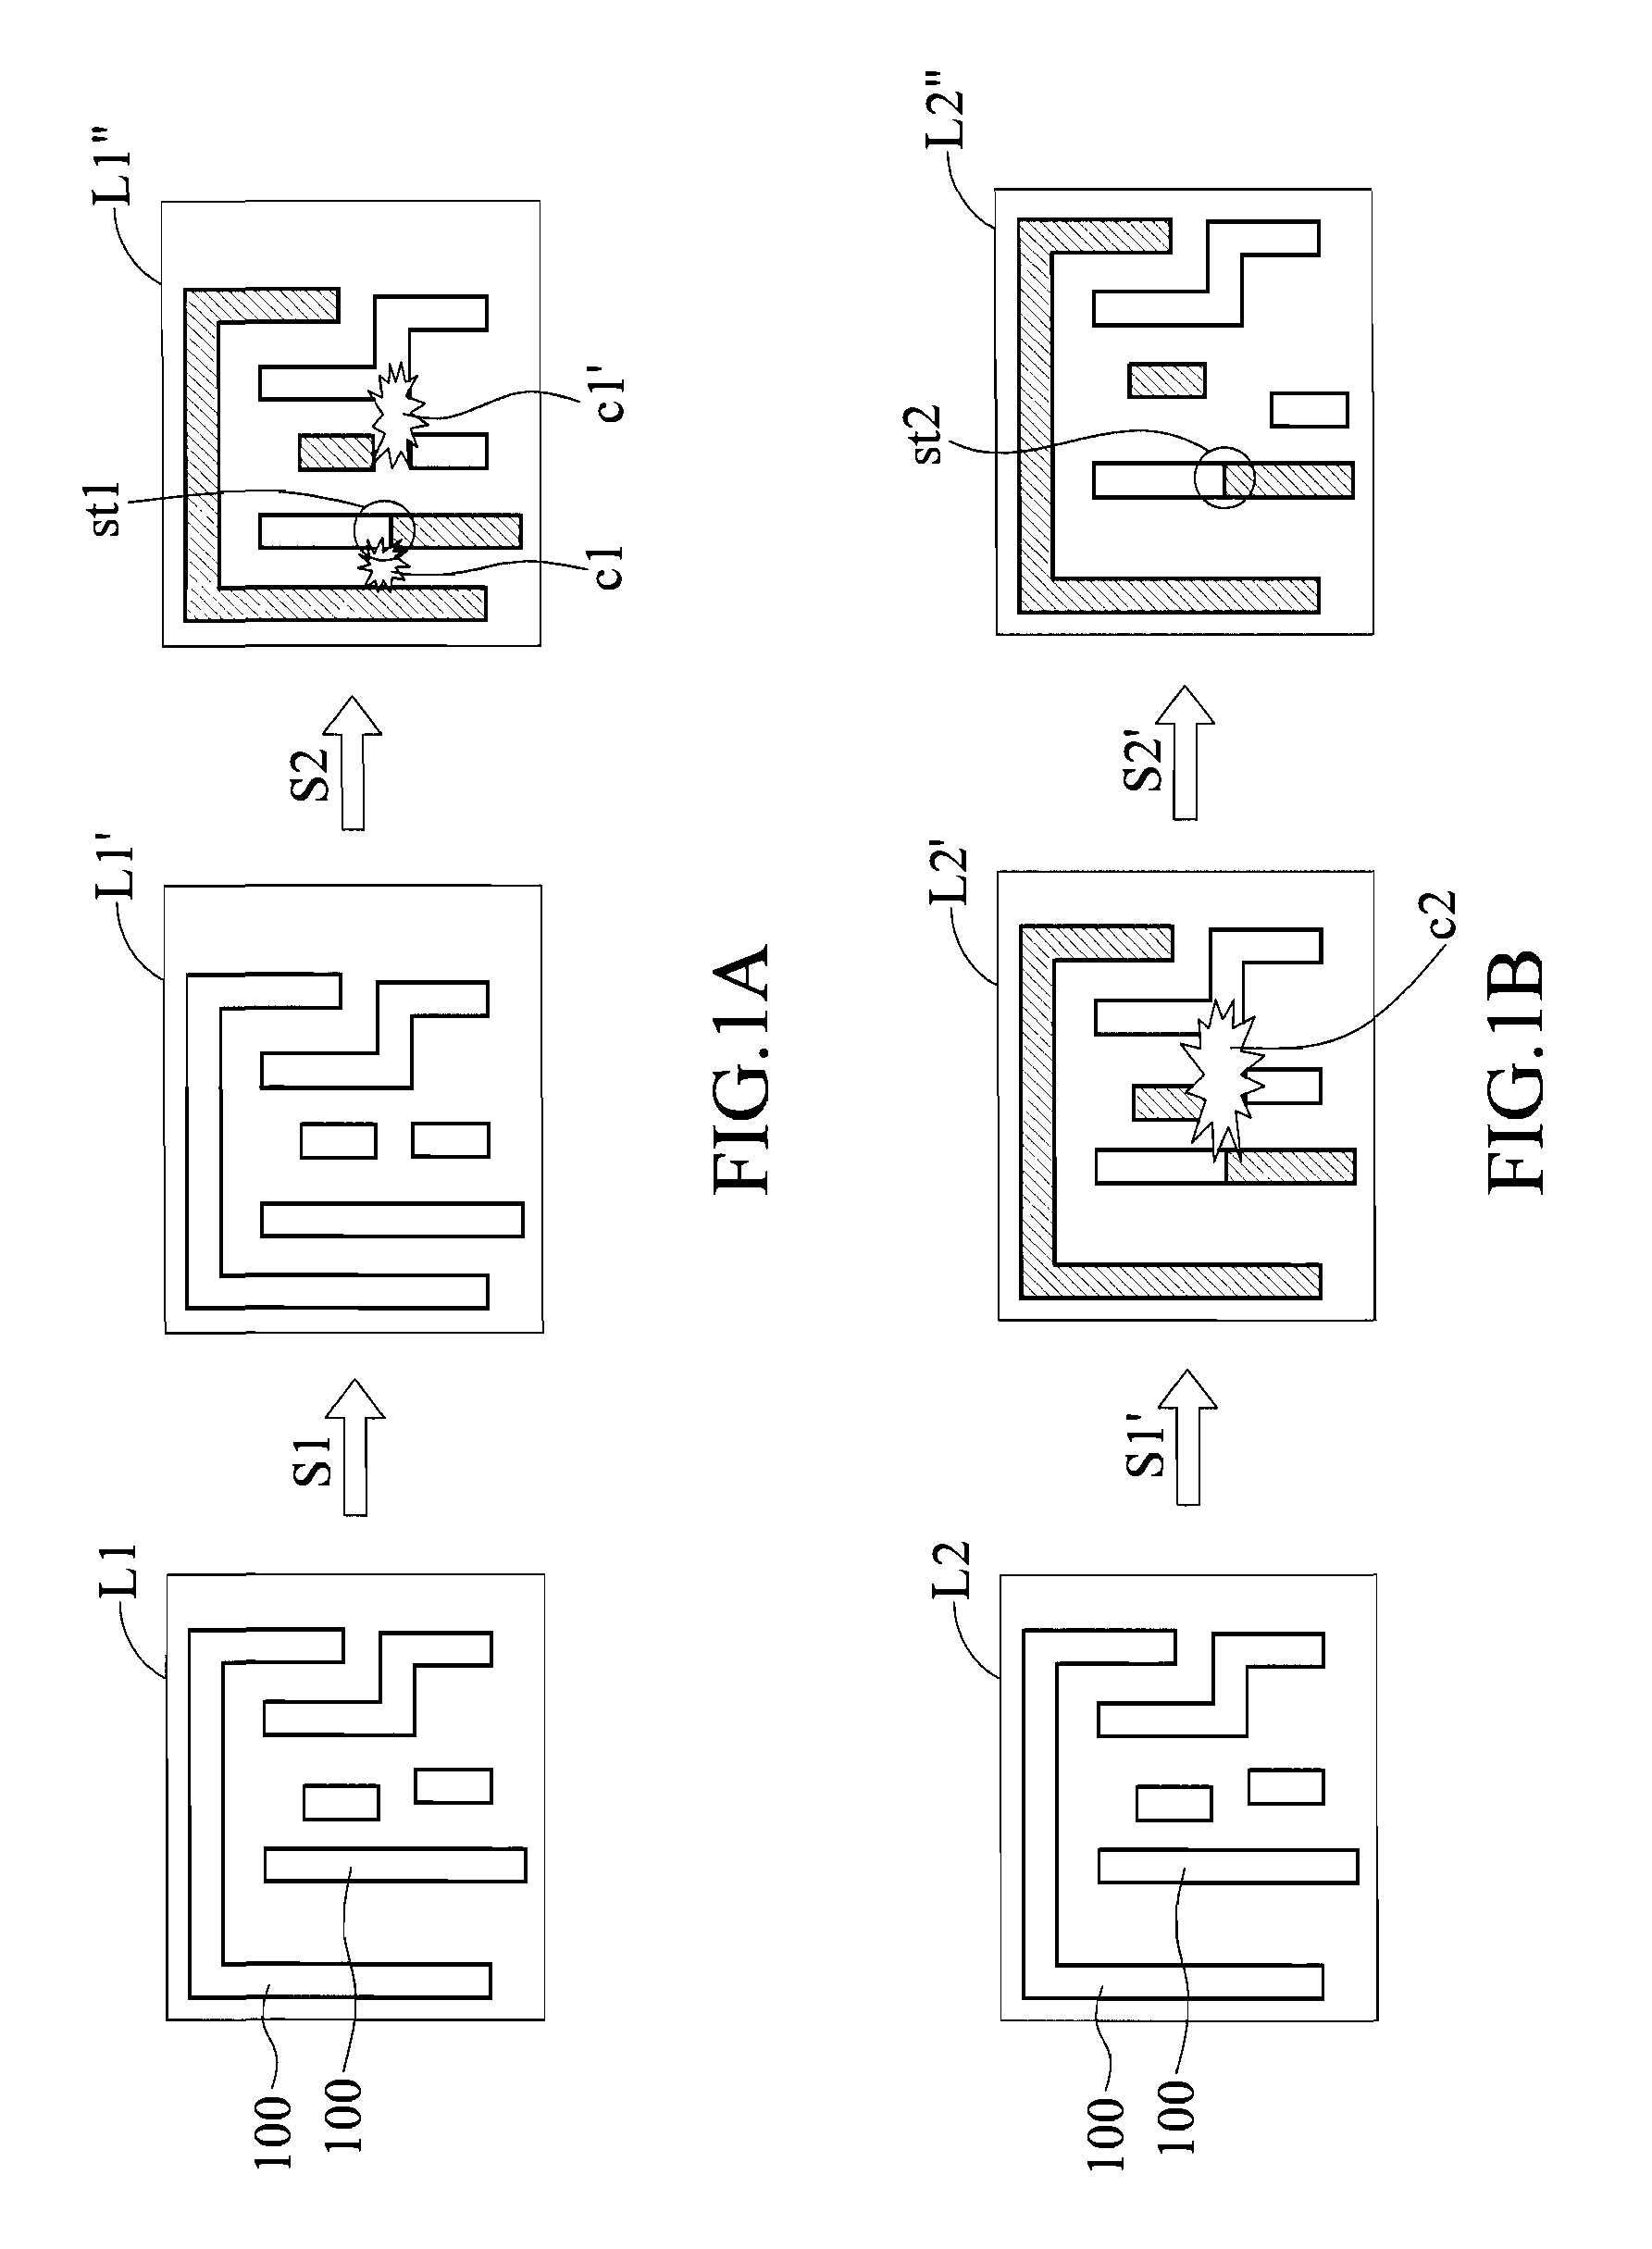 Method for concurrent migration and decomposition of integrated circuit layout